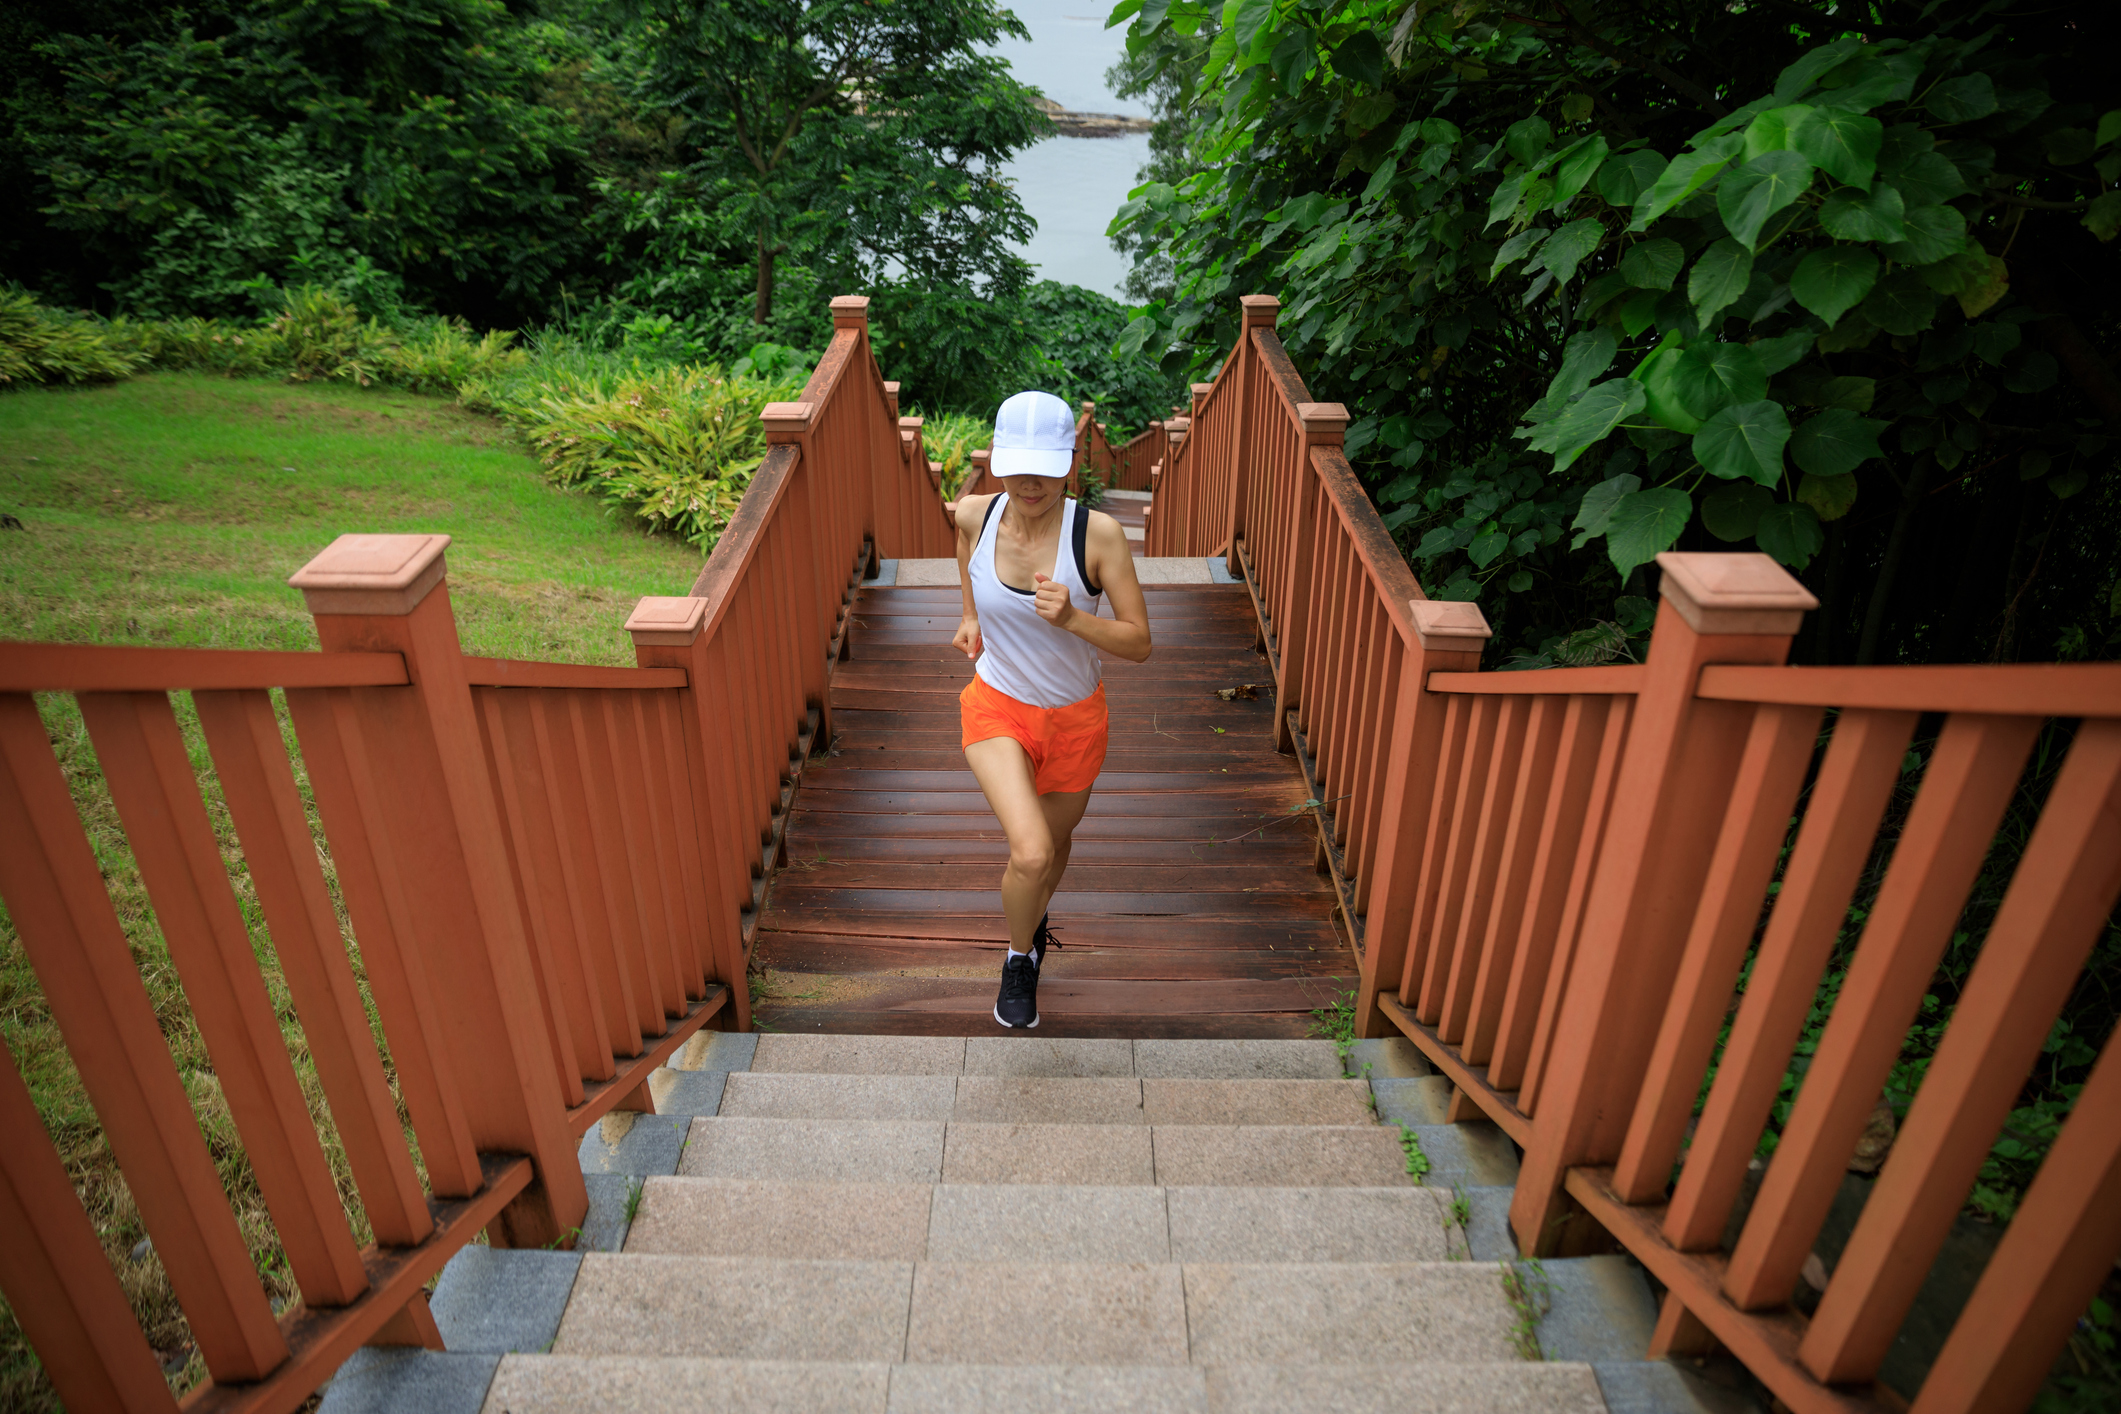 The fast health benefits of taking the stairs